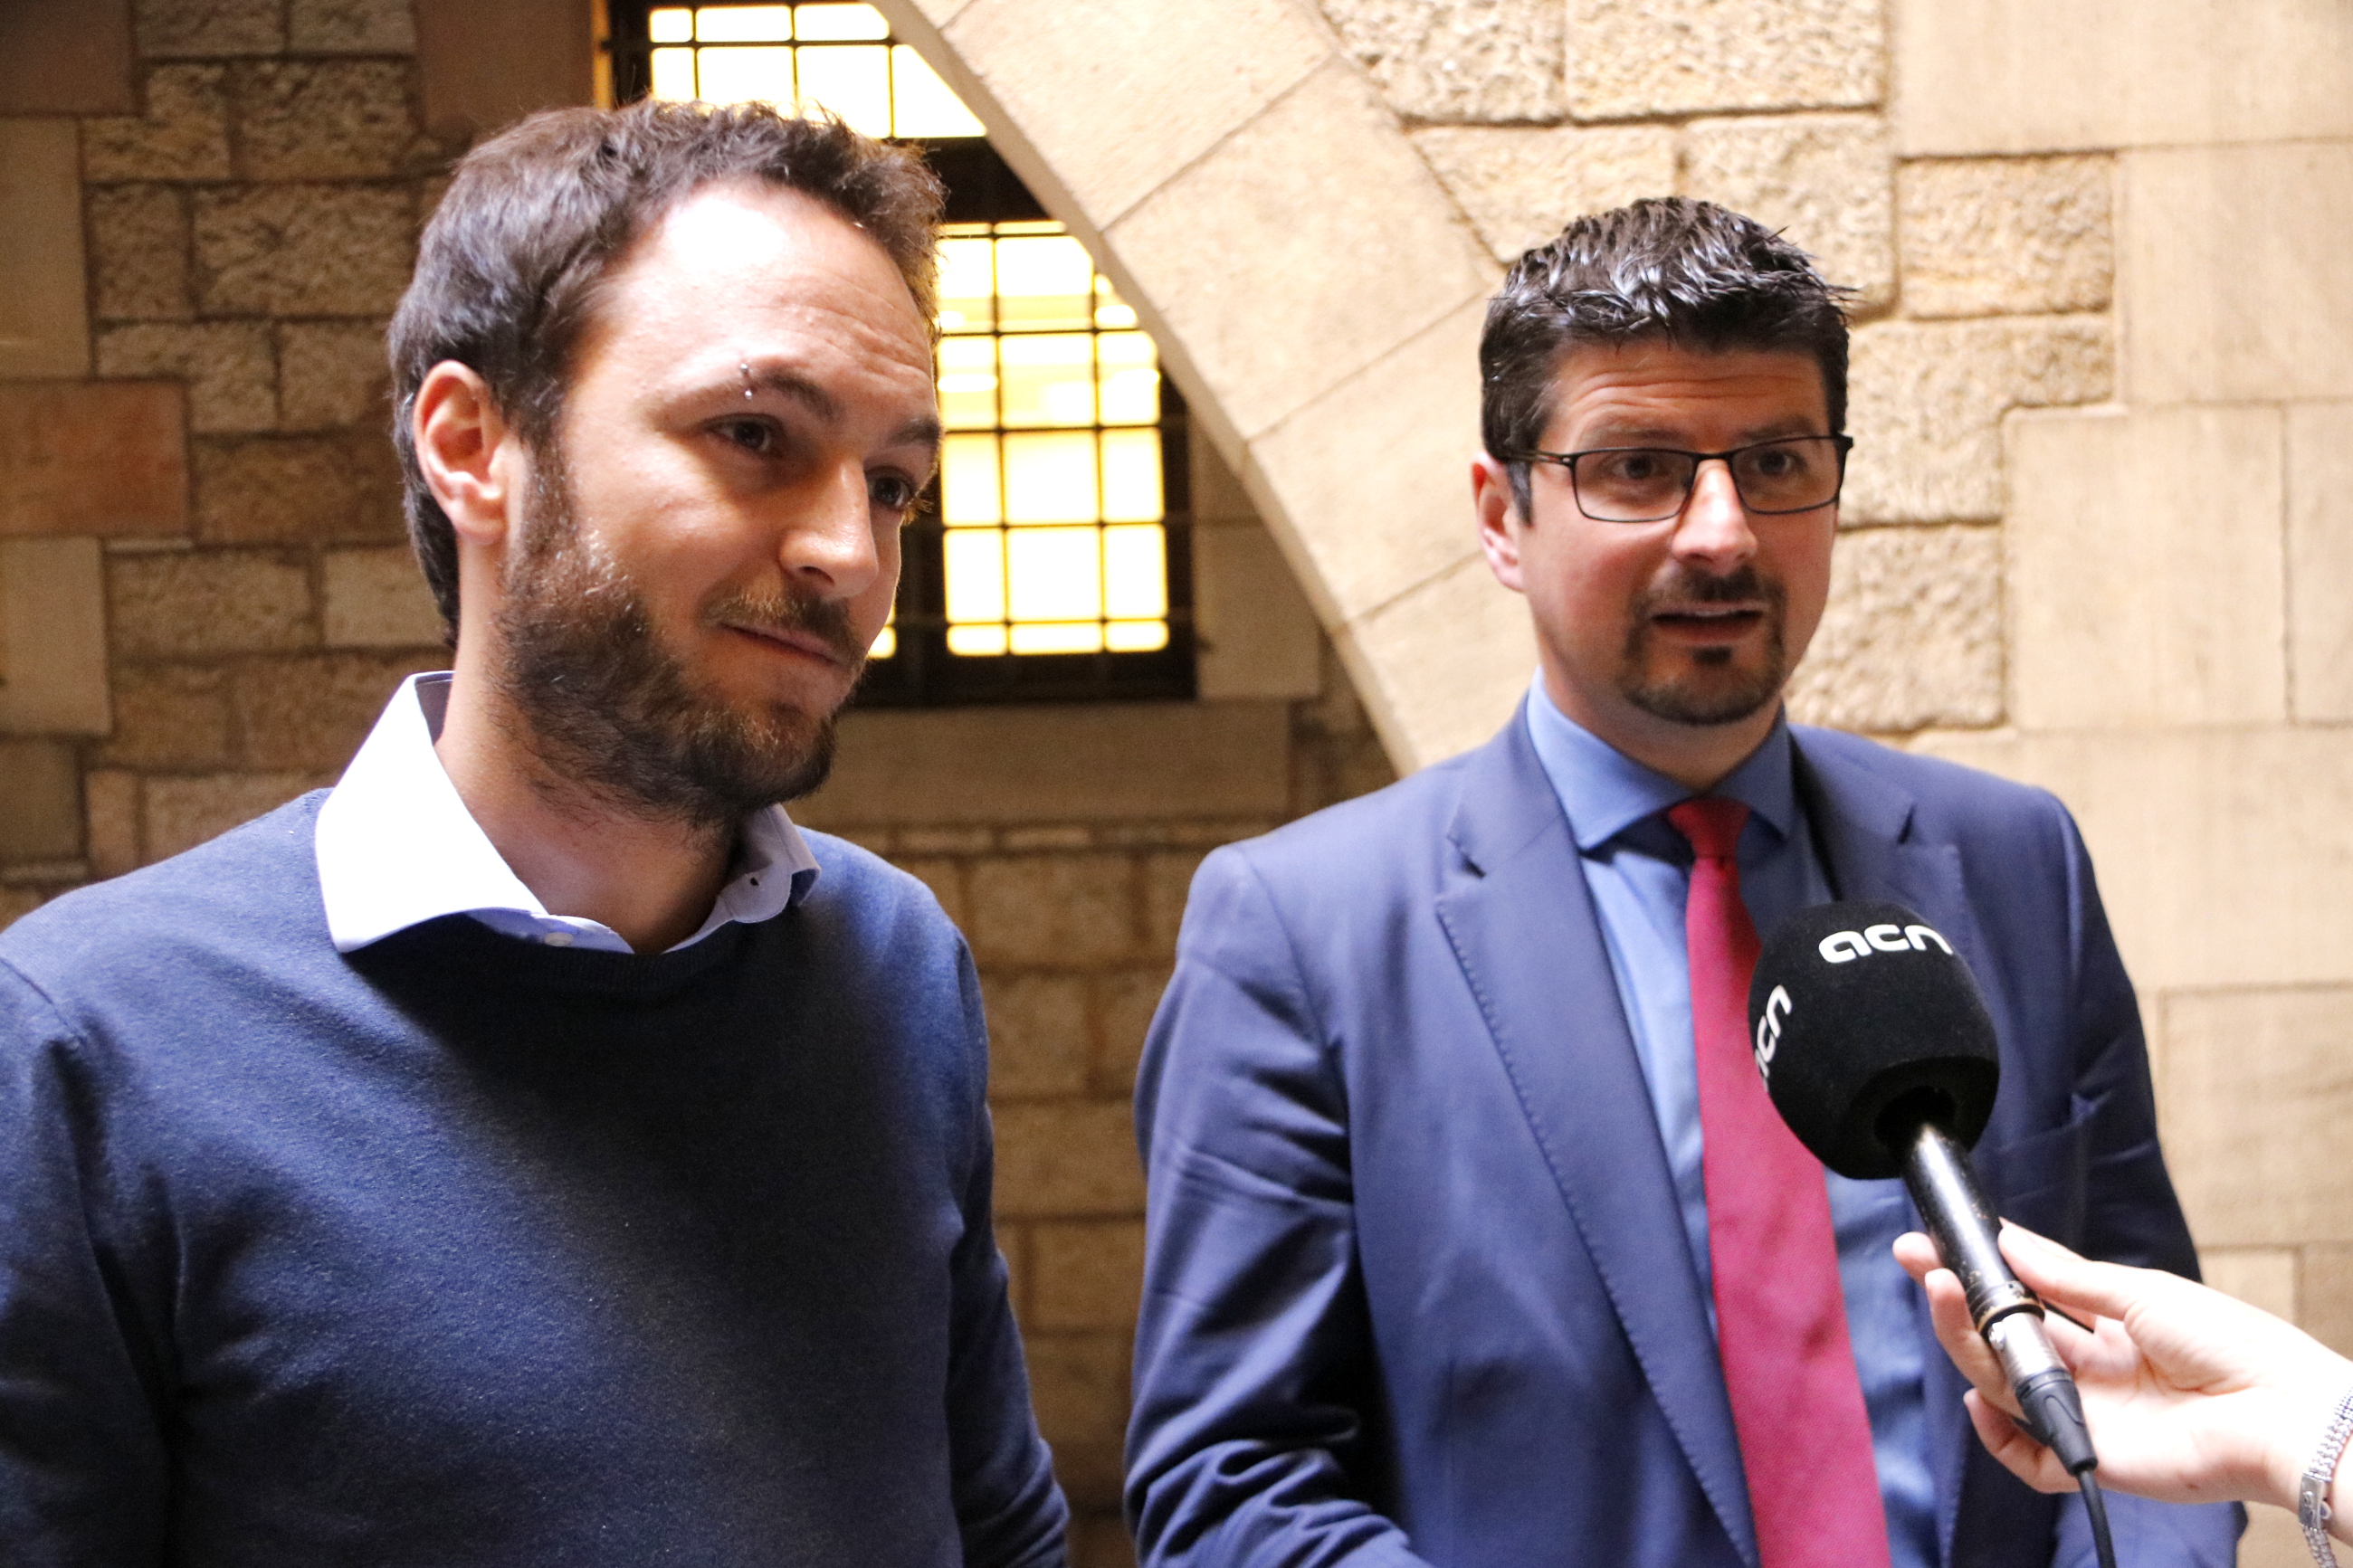 On the left, Swiss socialist MP Mathias Reynard at the seat of the Catalan government on April 22 2017 (by Rafa Garrido)